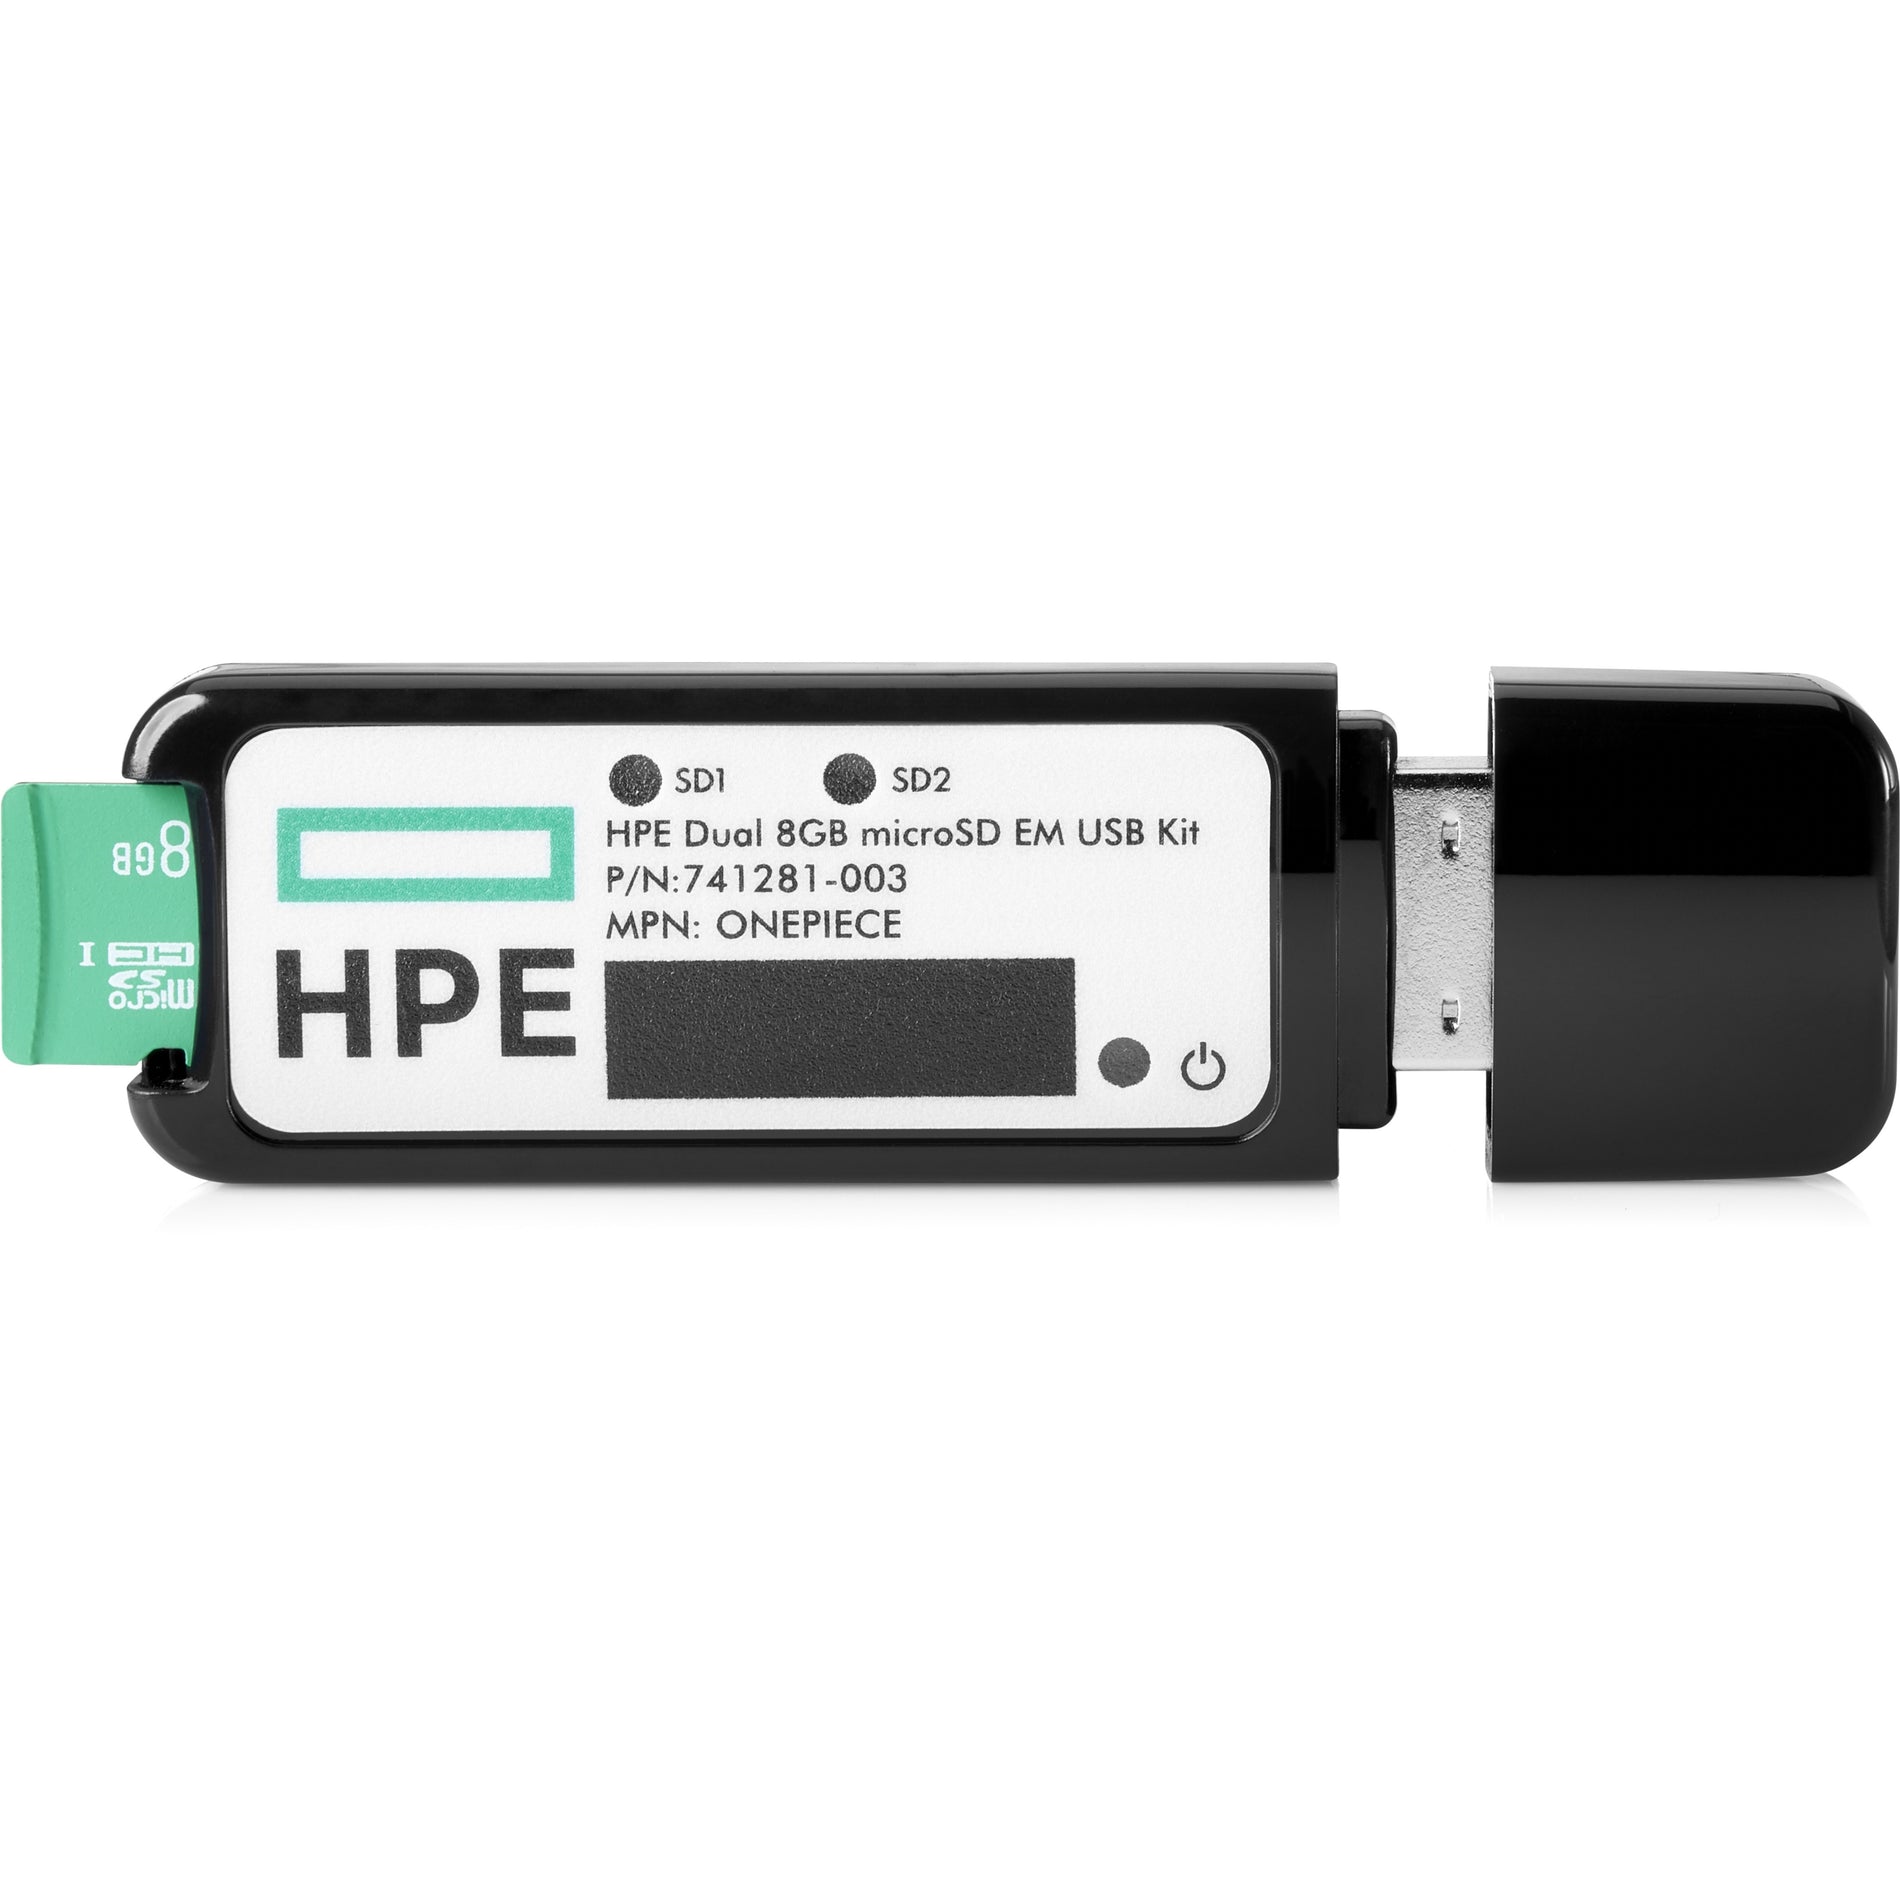 HPE 32GB MicroSD Raid 1 USB Boot Drive - Reliable Storage Solution for HPE ProLiant Servers [Discontinued]